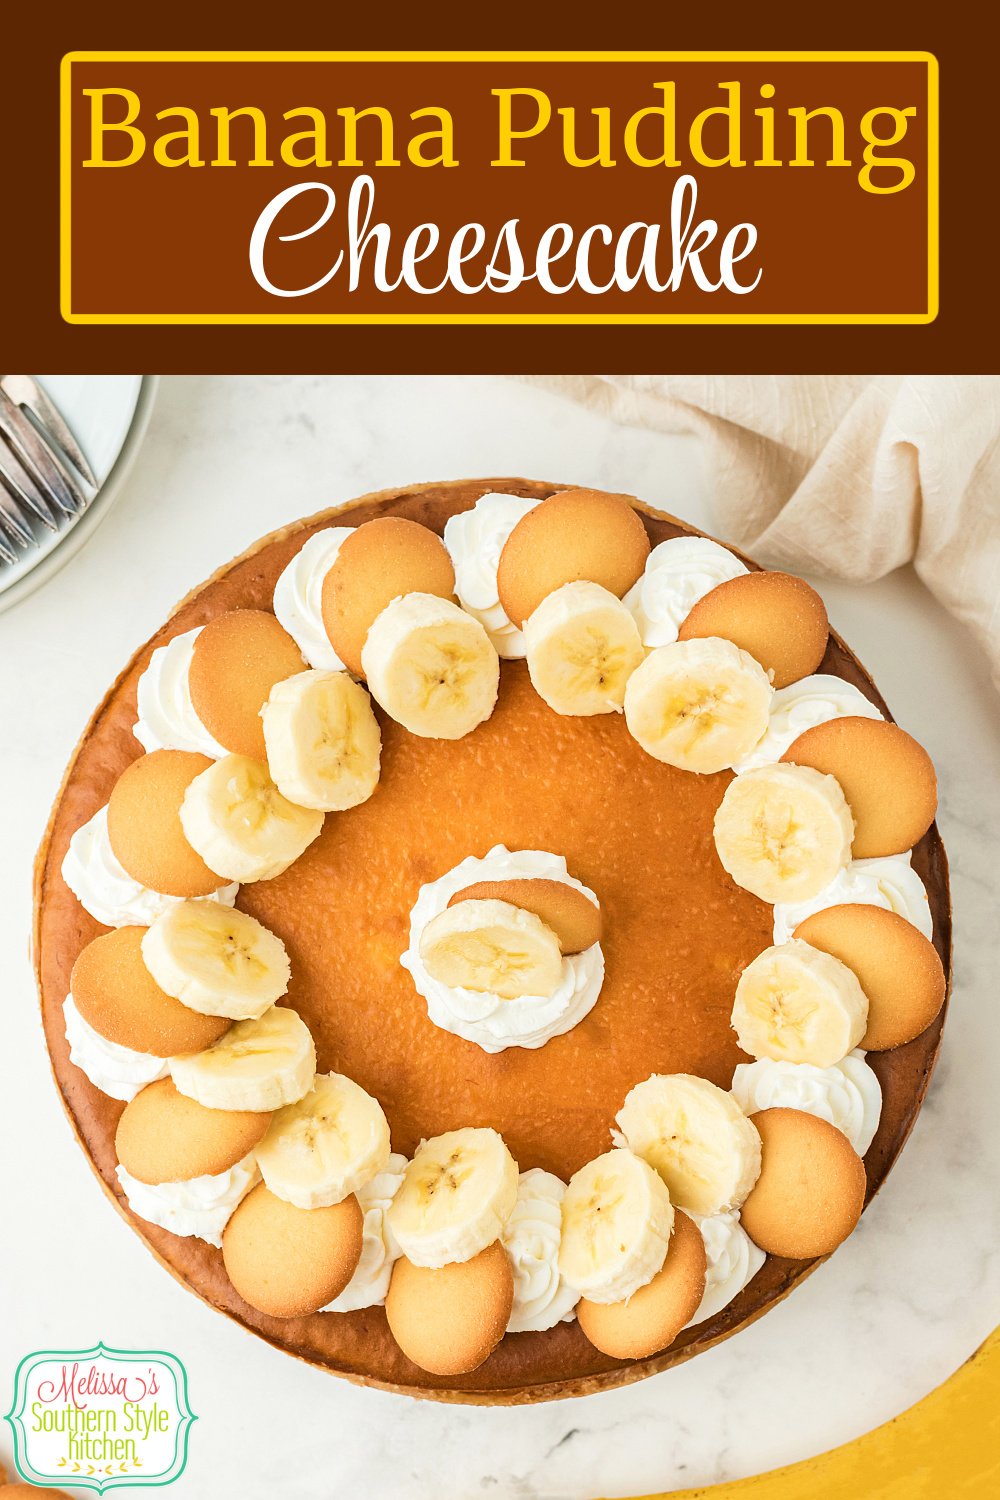 This Banana Pudding Cheesecake recipe combines a fluffy New York style cheesecake with Southern banana pudding. #bananapudding #bananapuddingcheesecake #cheesecakerecipes #easycheeecakerecipe #desserts #southernrecipes #southerndesserts